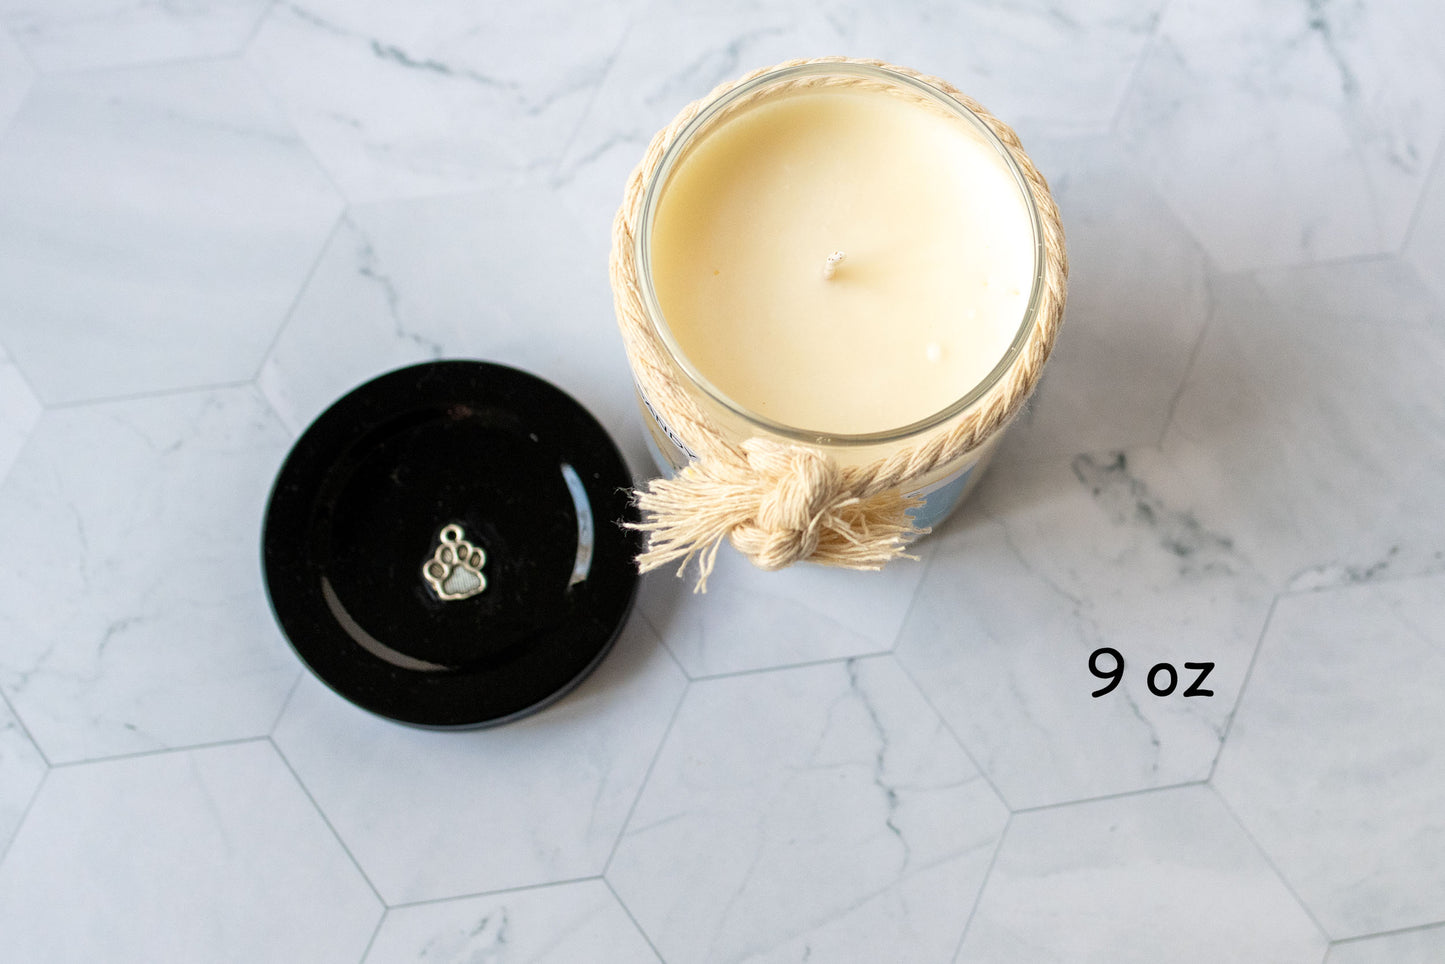 Dog Lover Soy Wax Candle - "Who rescued who?"